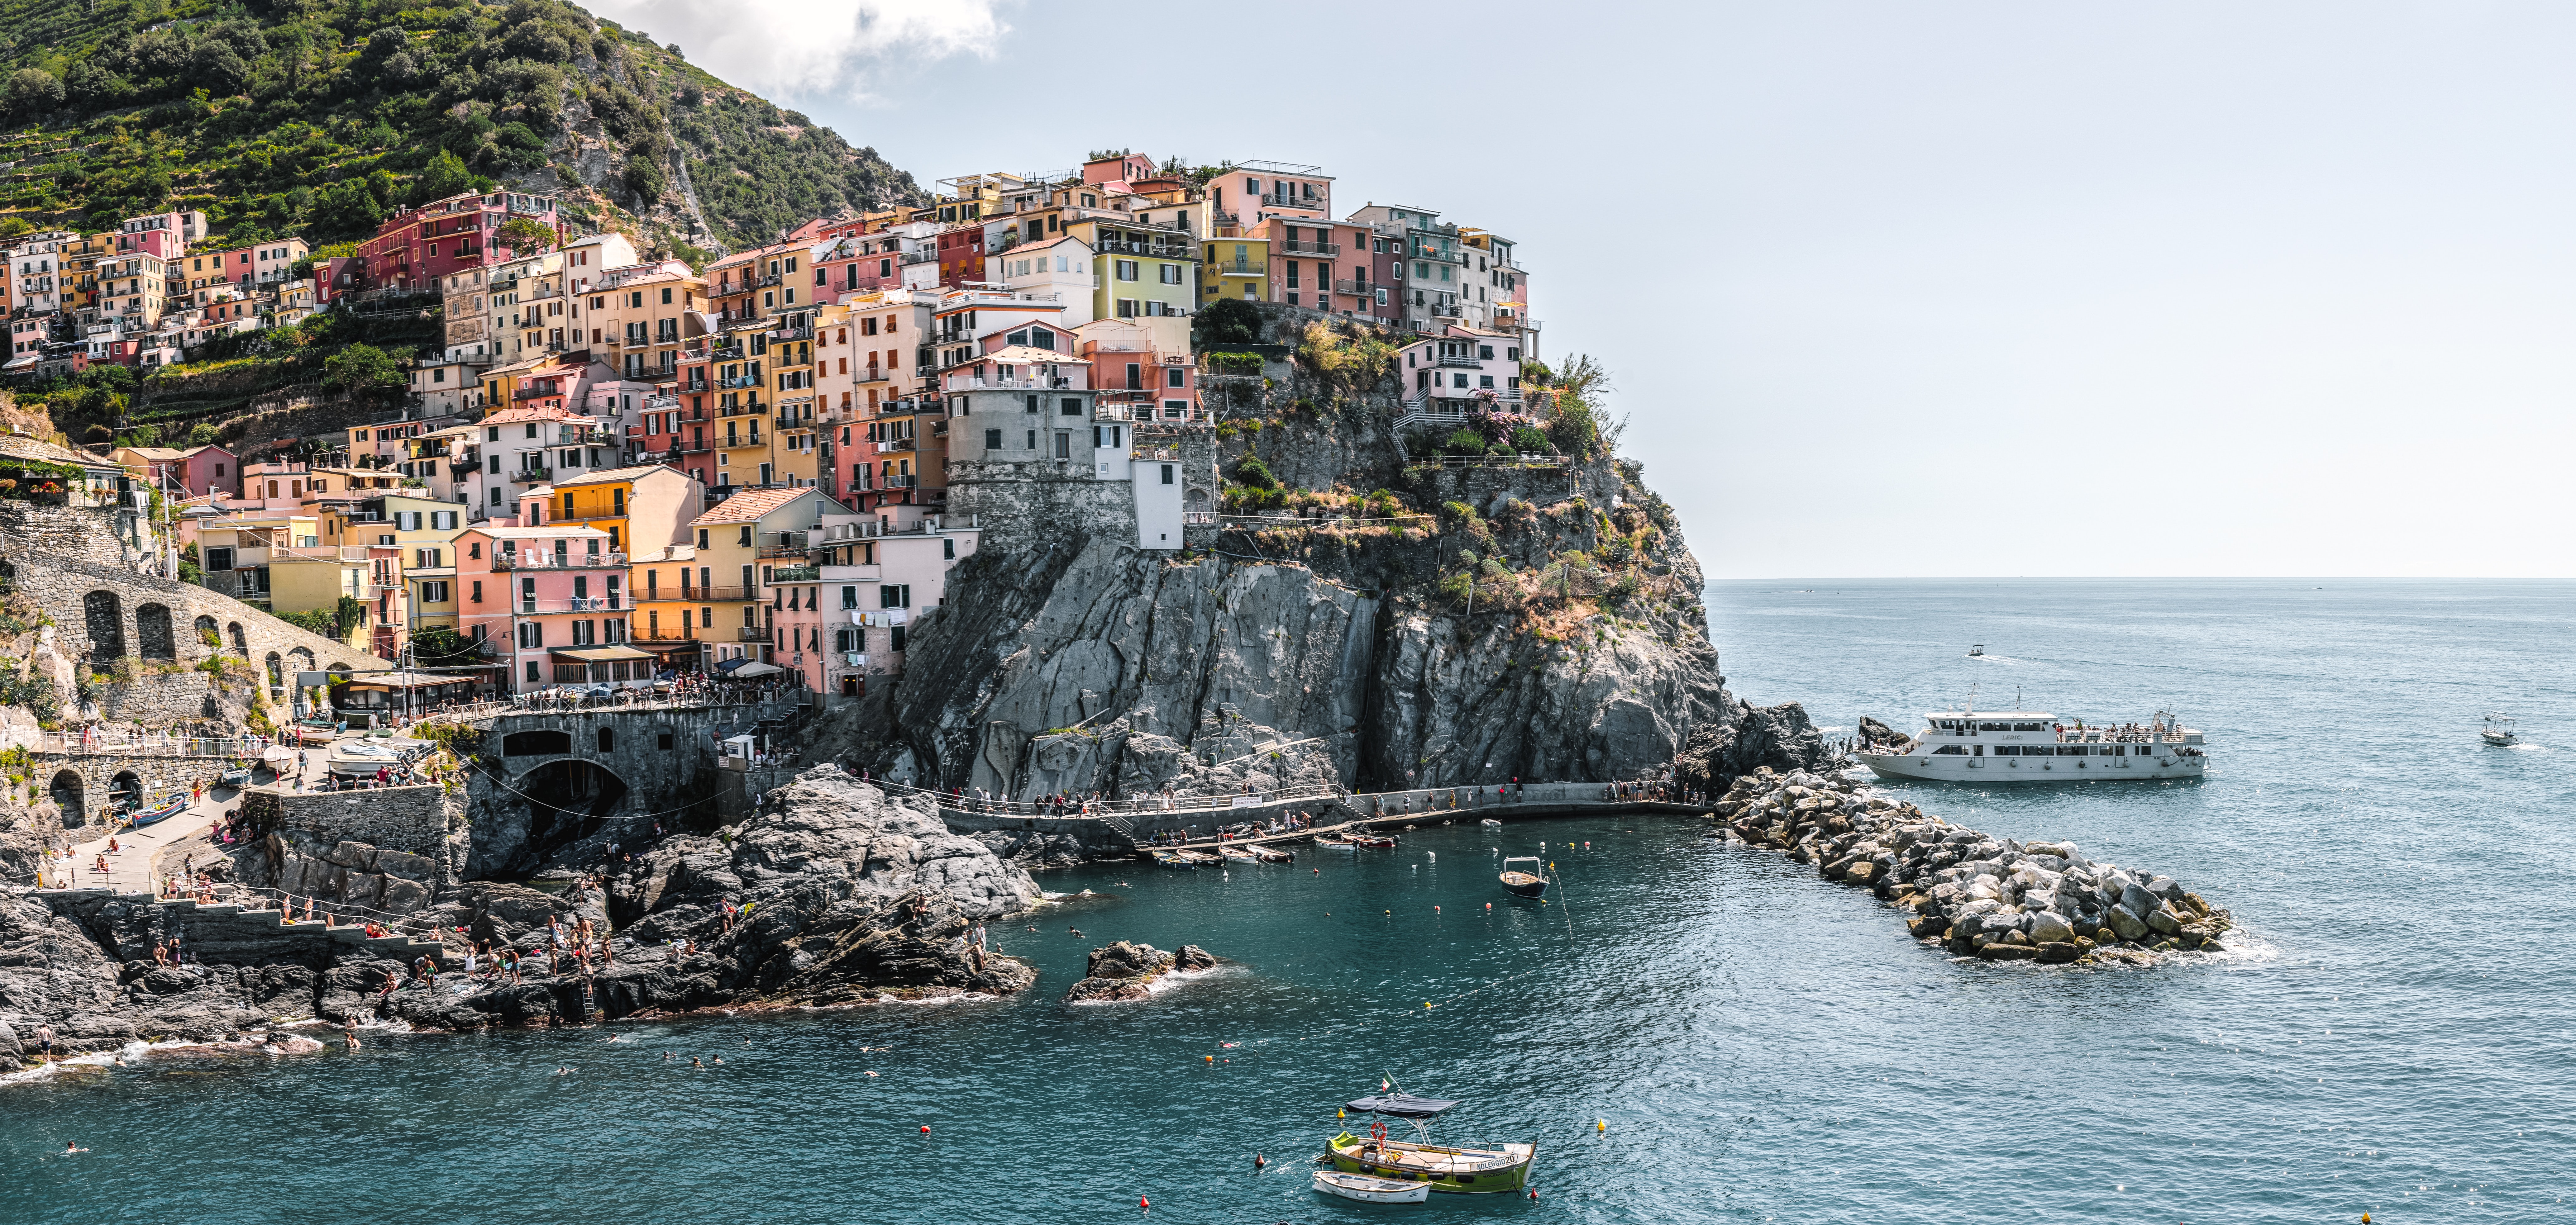 The Best Photo Ops (and Instagram Spots) in Italy